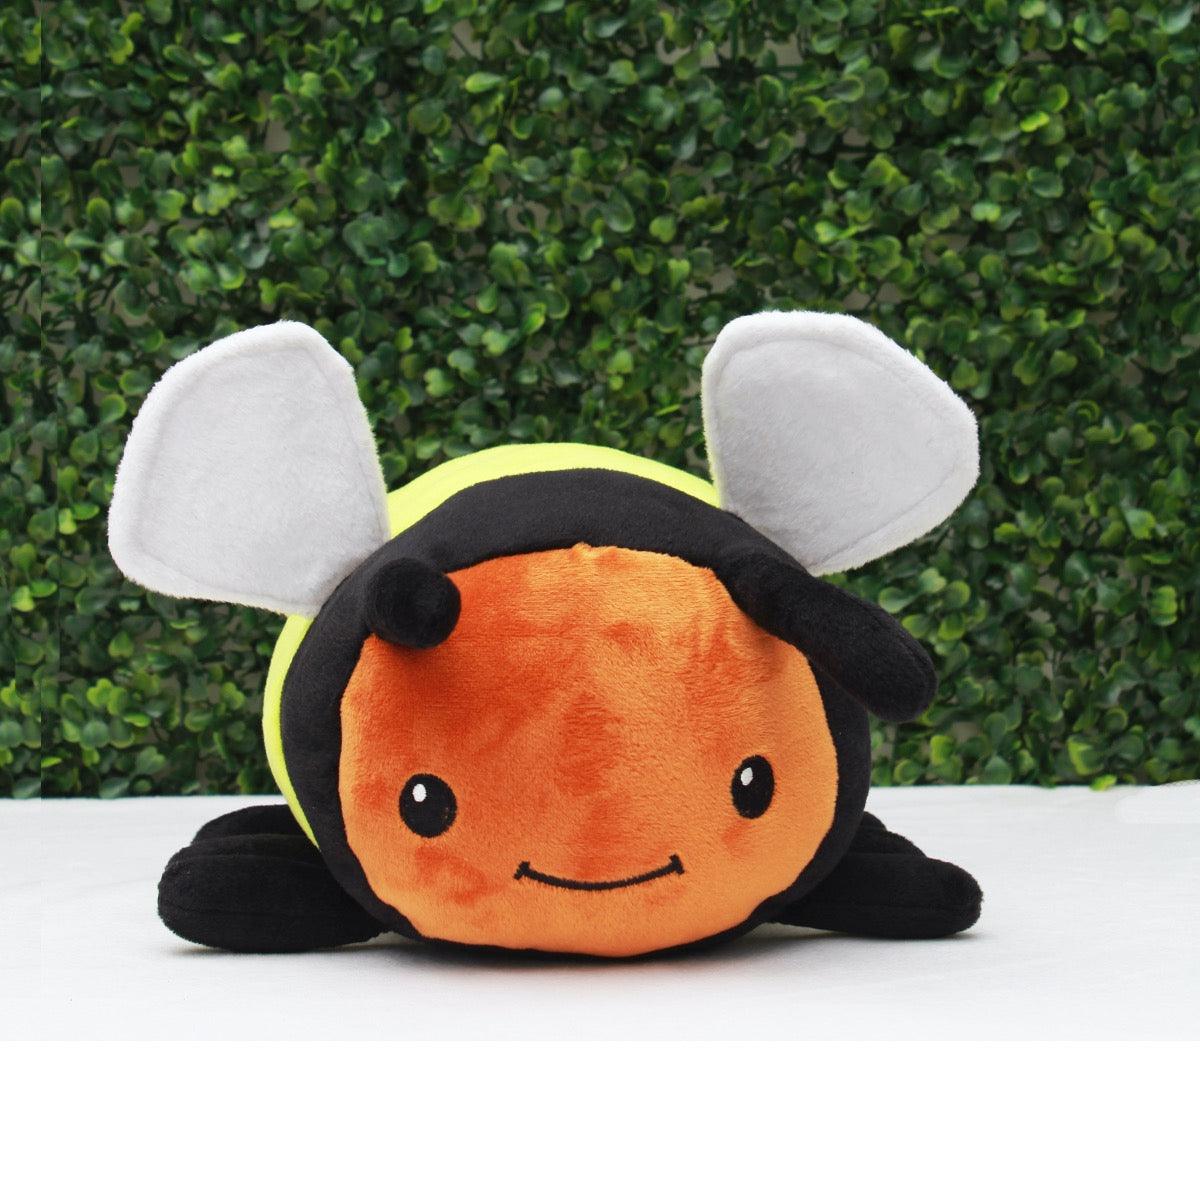 Plushkins Bee, Premium Multi-colour Soft Toy for Kids, Aged 1-10 years, Extra Soft Stuffed Toy with Plyfibre Stuffing